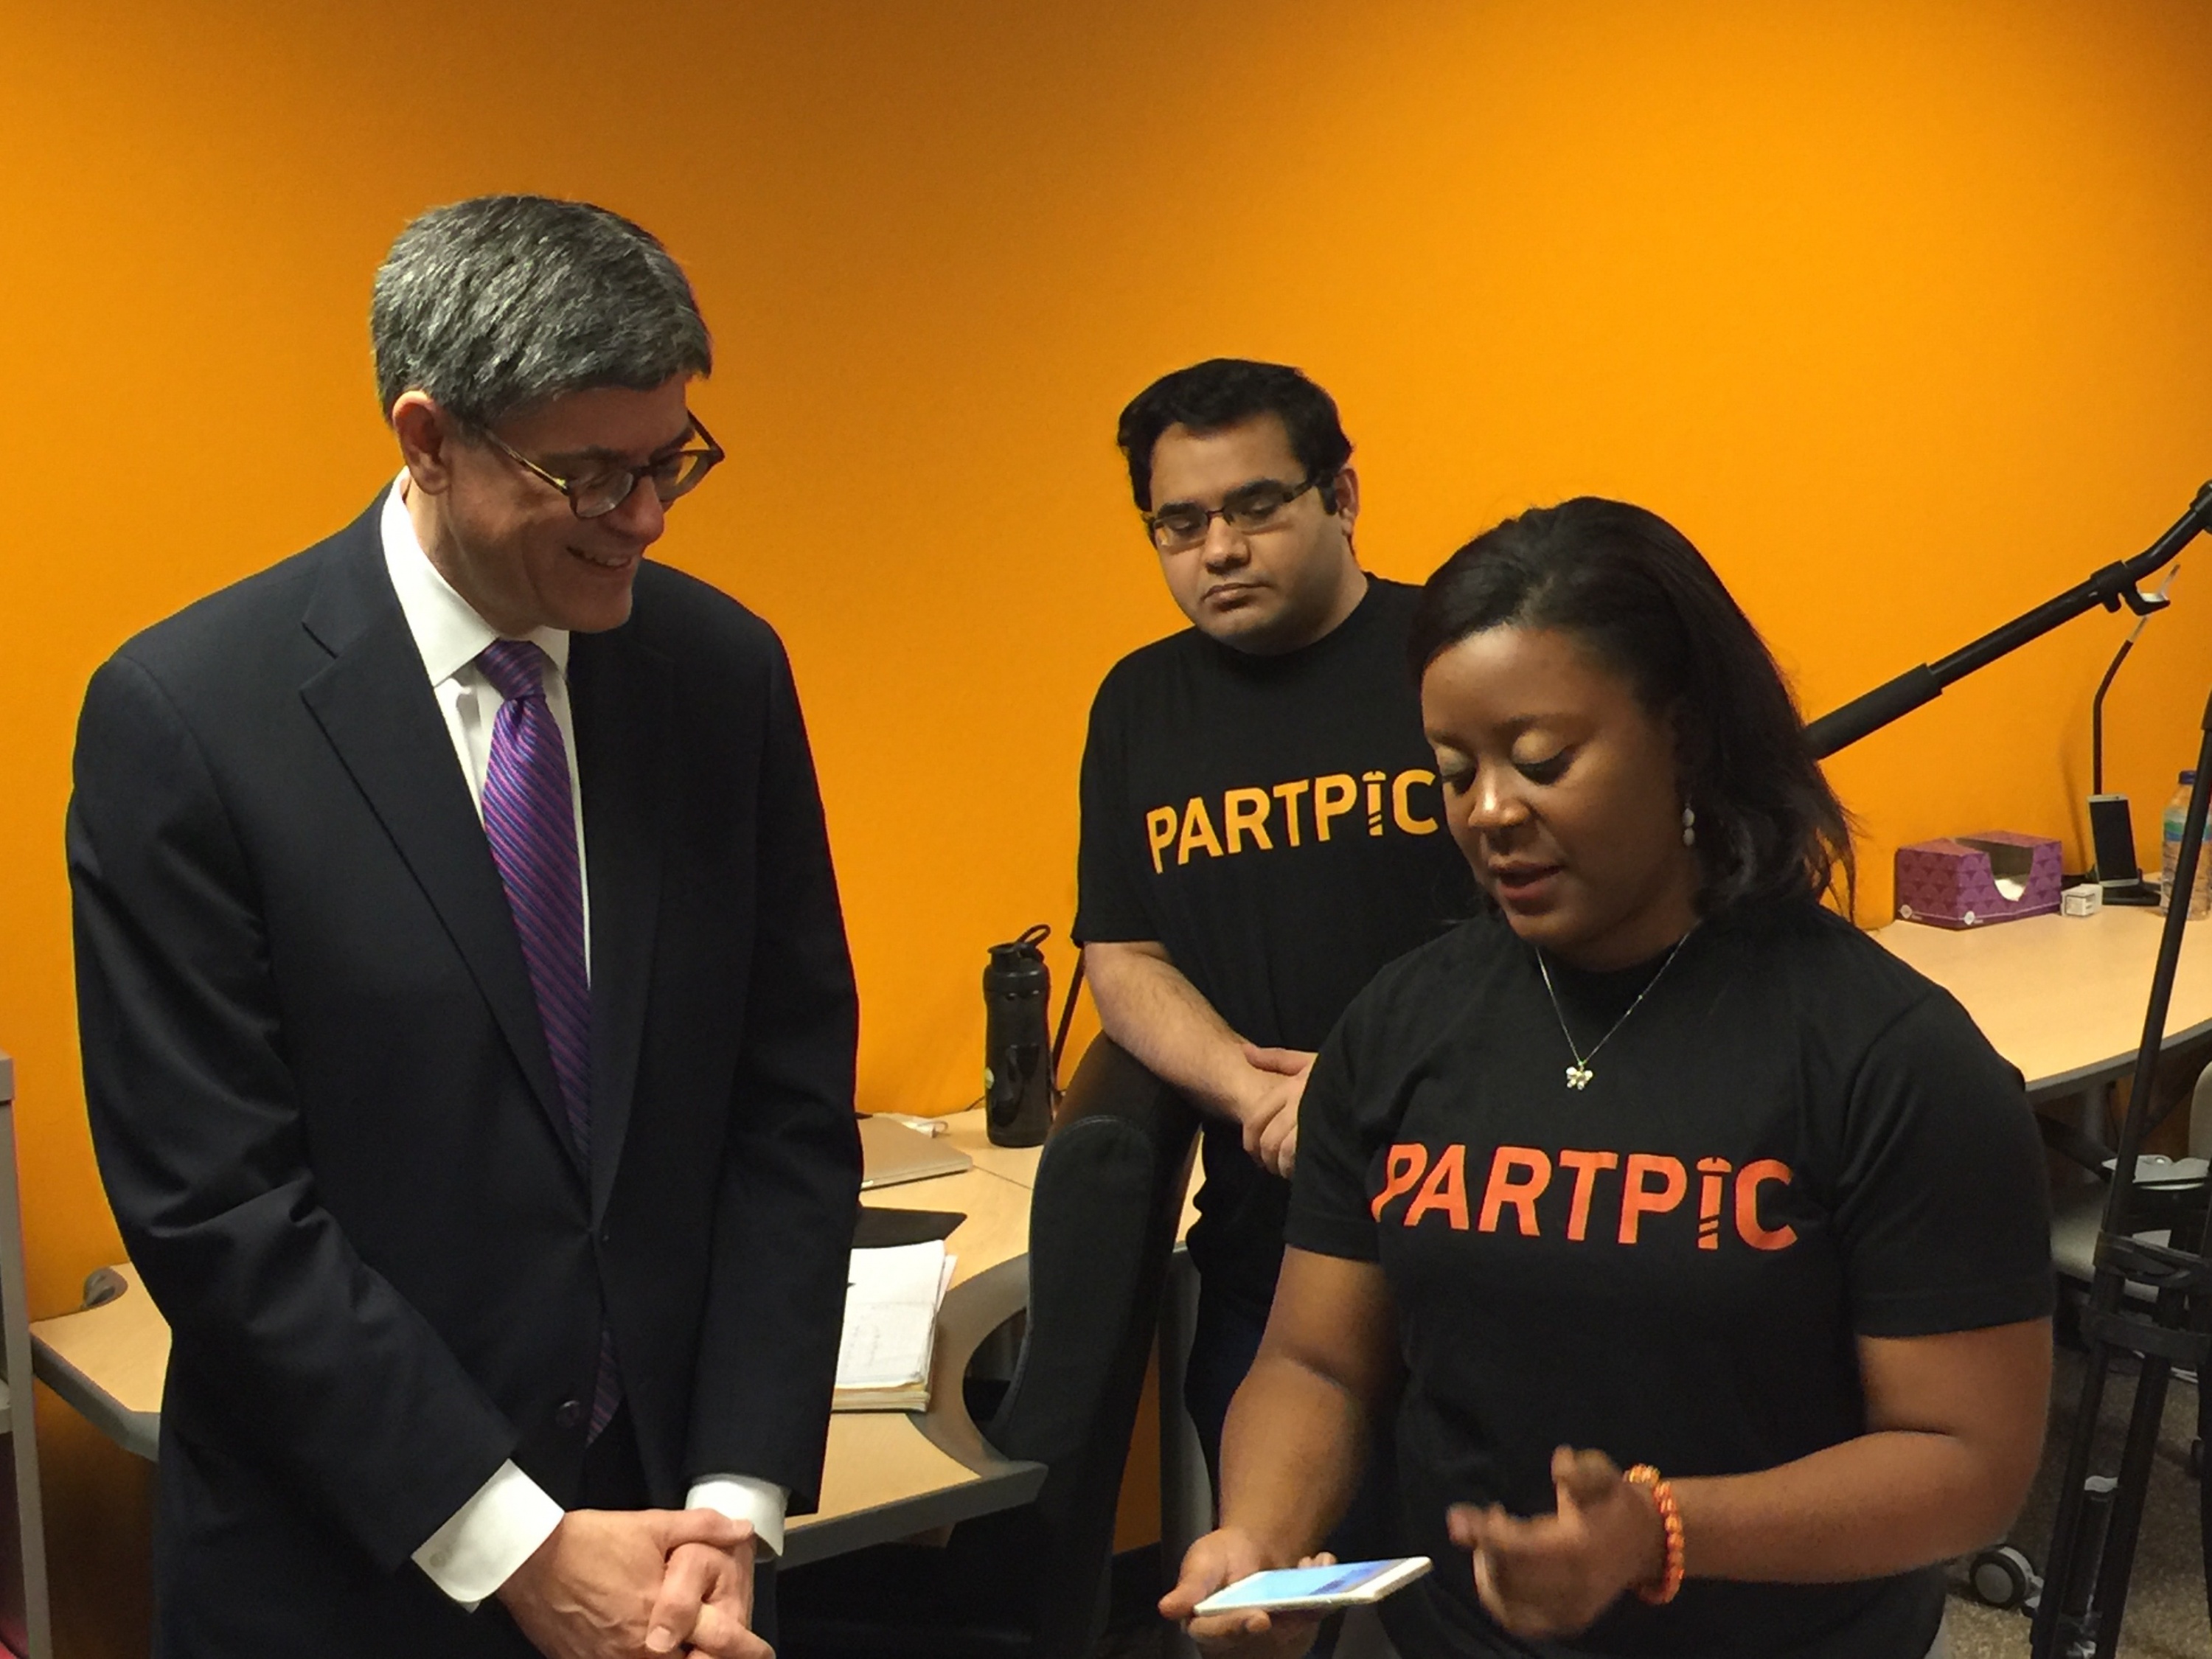 U.S. Treasury Secretary Jack Lew, left, listens to Nashlie H. Sephus, Ph.D. ECE 2014, as she explains visual recognition technology. Sephus is chief technology officer of Partpic, a startup technology company incubating at Georgia Tech's Advanced Technology Development Center (ATDC). Lew came to ATDC to meet with entrepreneurs and discuss the national economy, as well as hear the challenges they face in accessing capital and solutions they had.